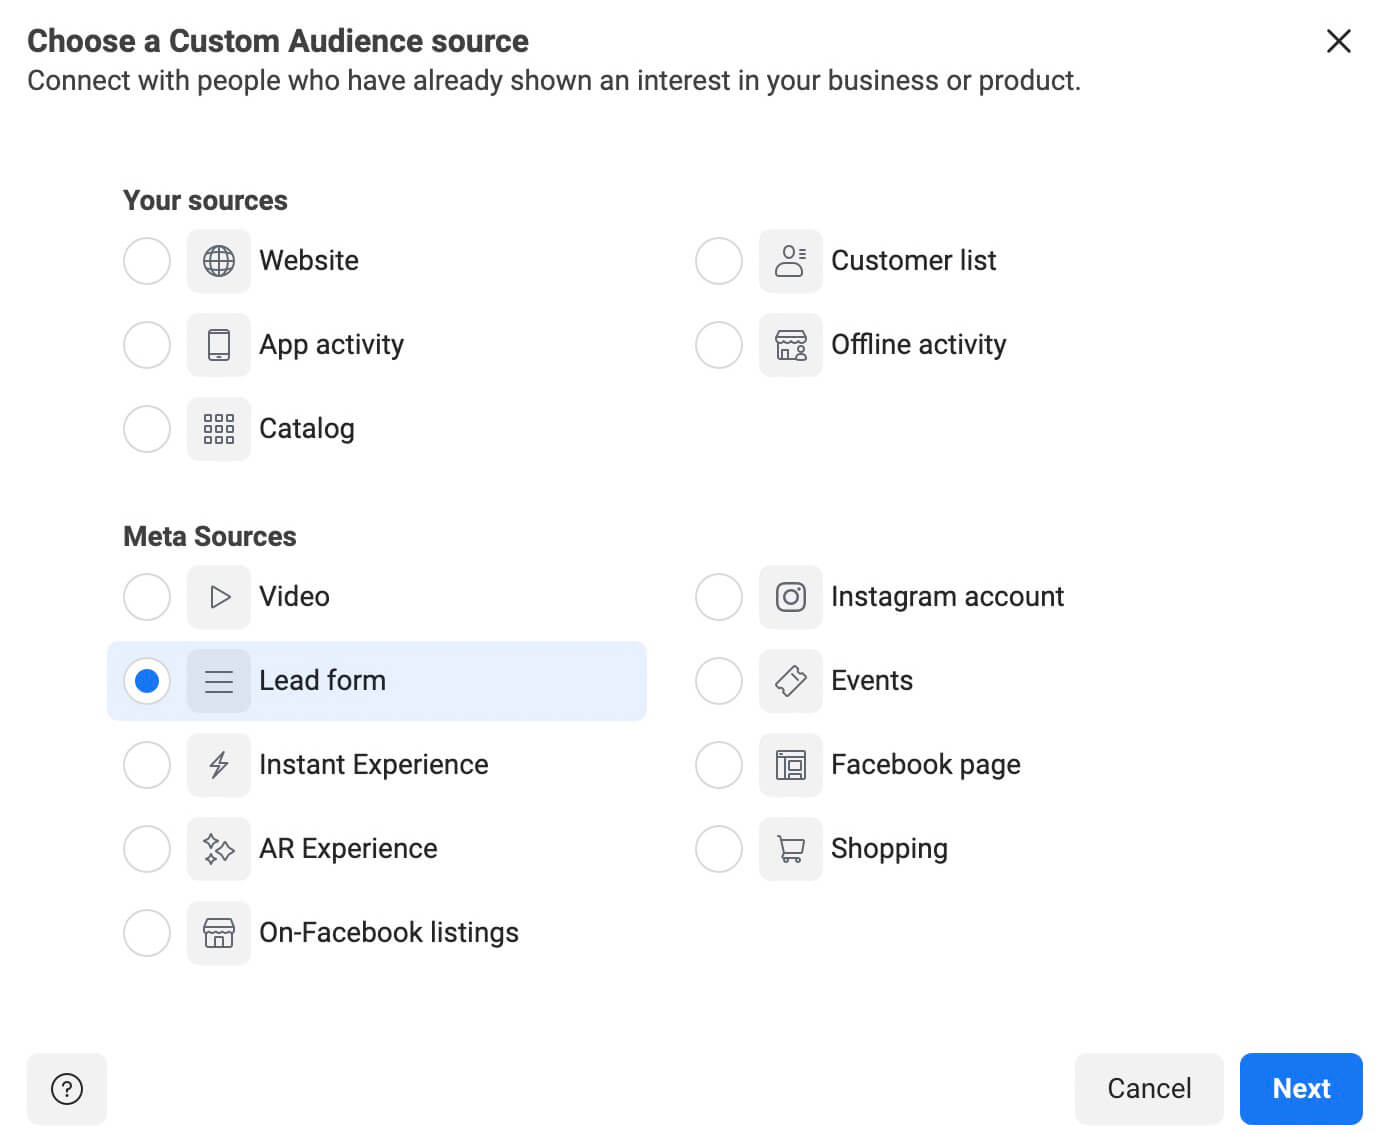 how-to-target-in-app-conversions-for-facebook-ads-meta-data-sources-build-audiences-based-on-messages-lead-forms-product-catalogs-other-native-sources-example-15